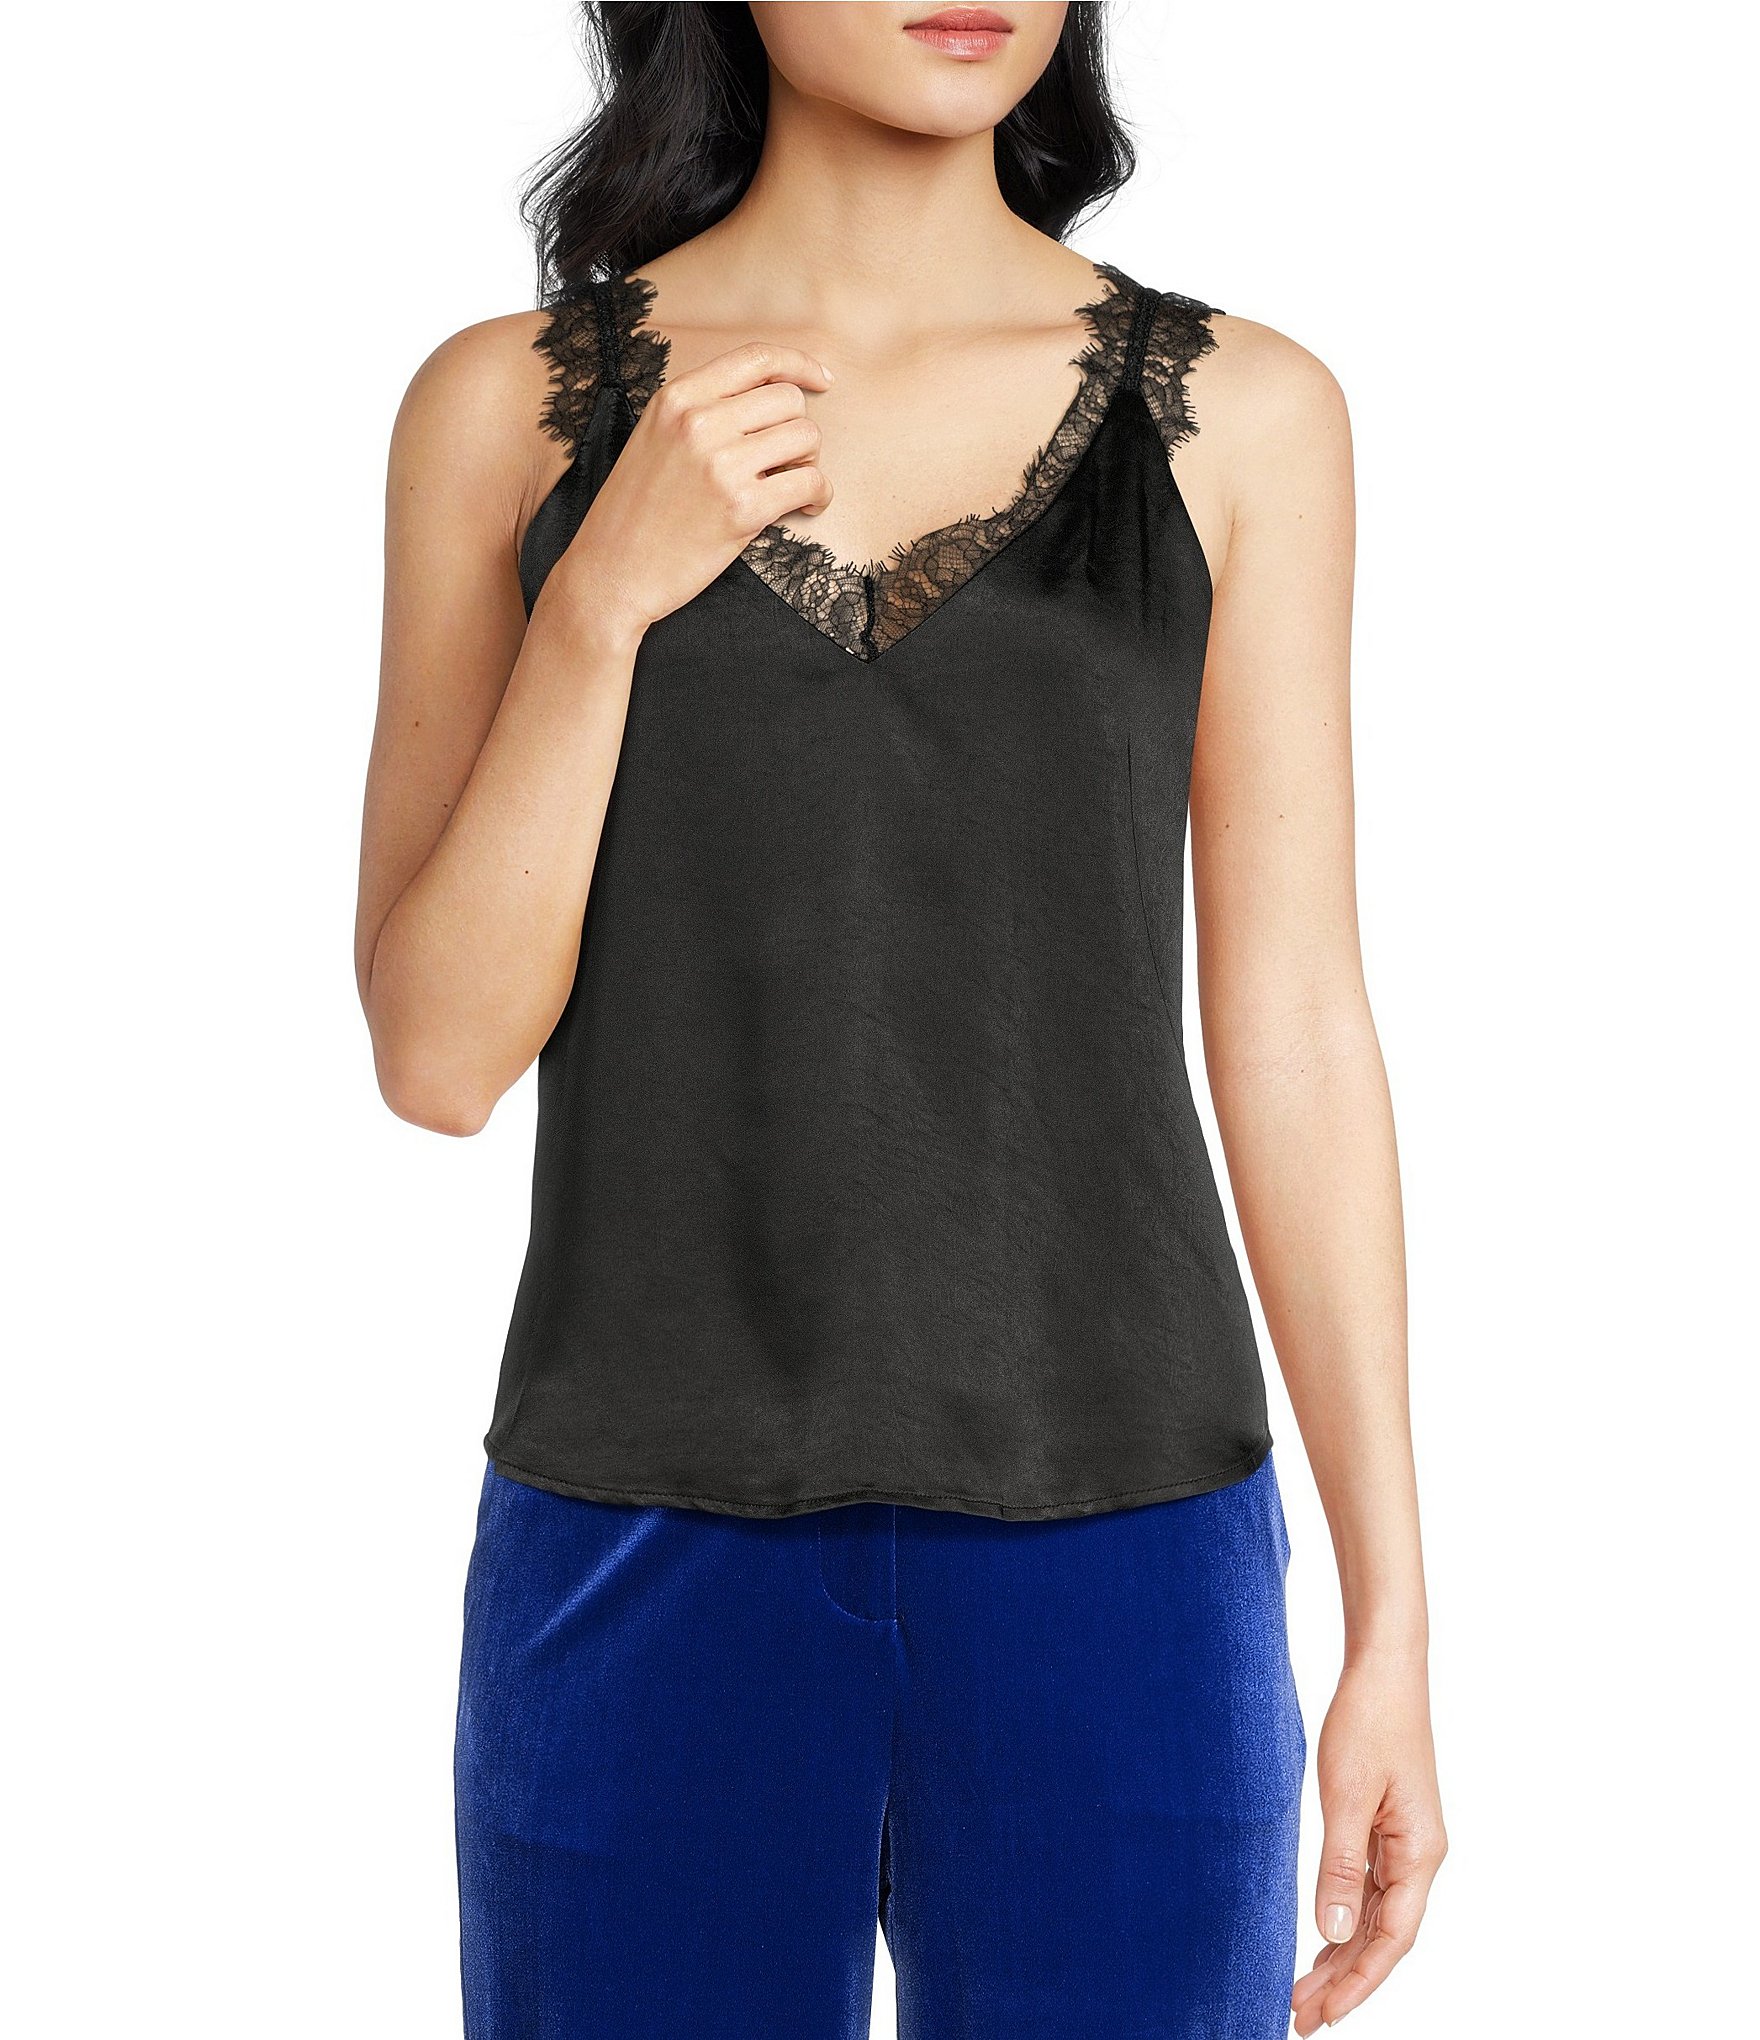 Lace-trimmed Camisole Top - Black - Ladies